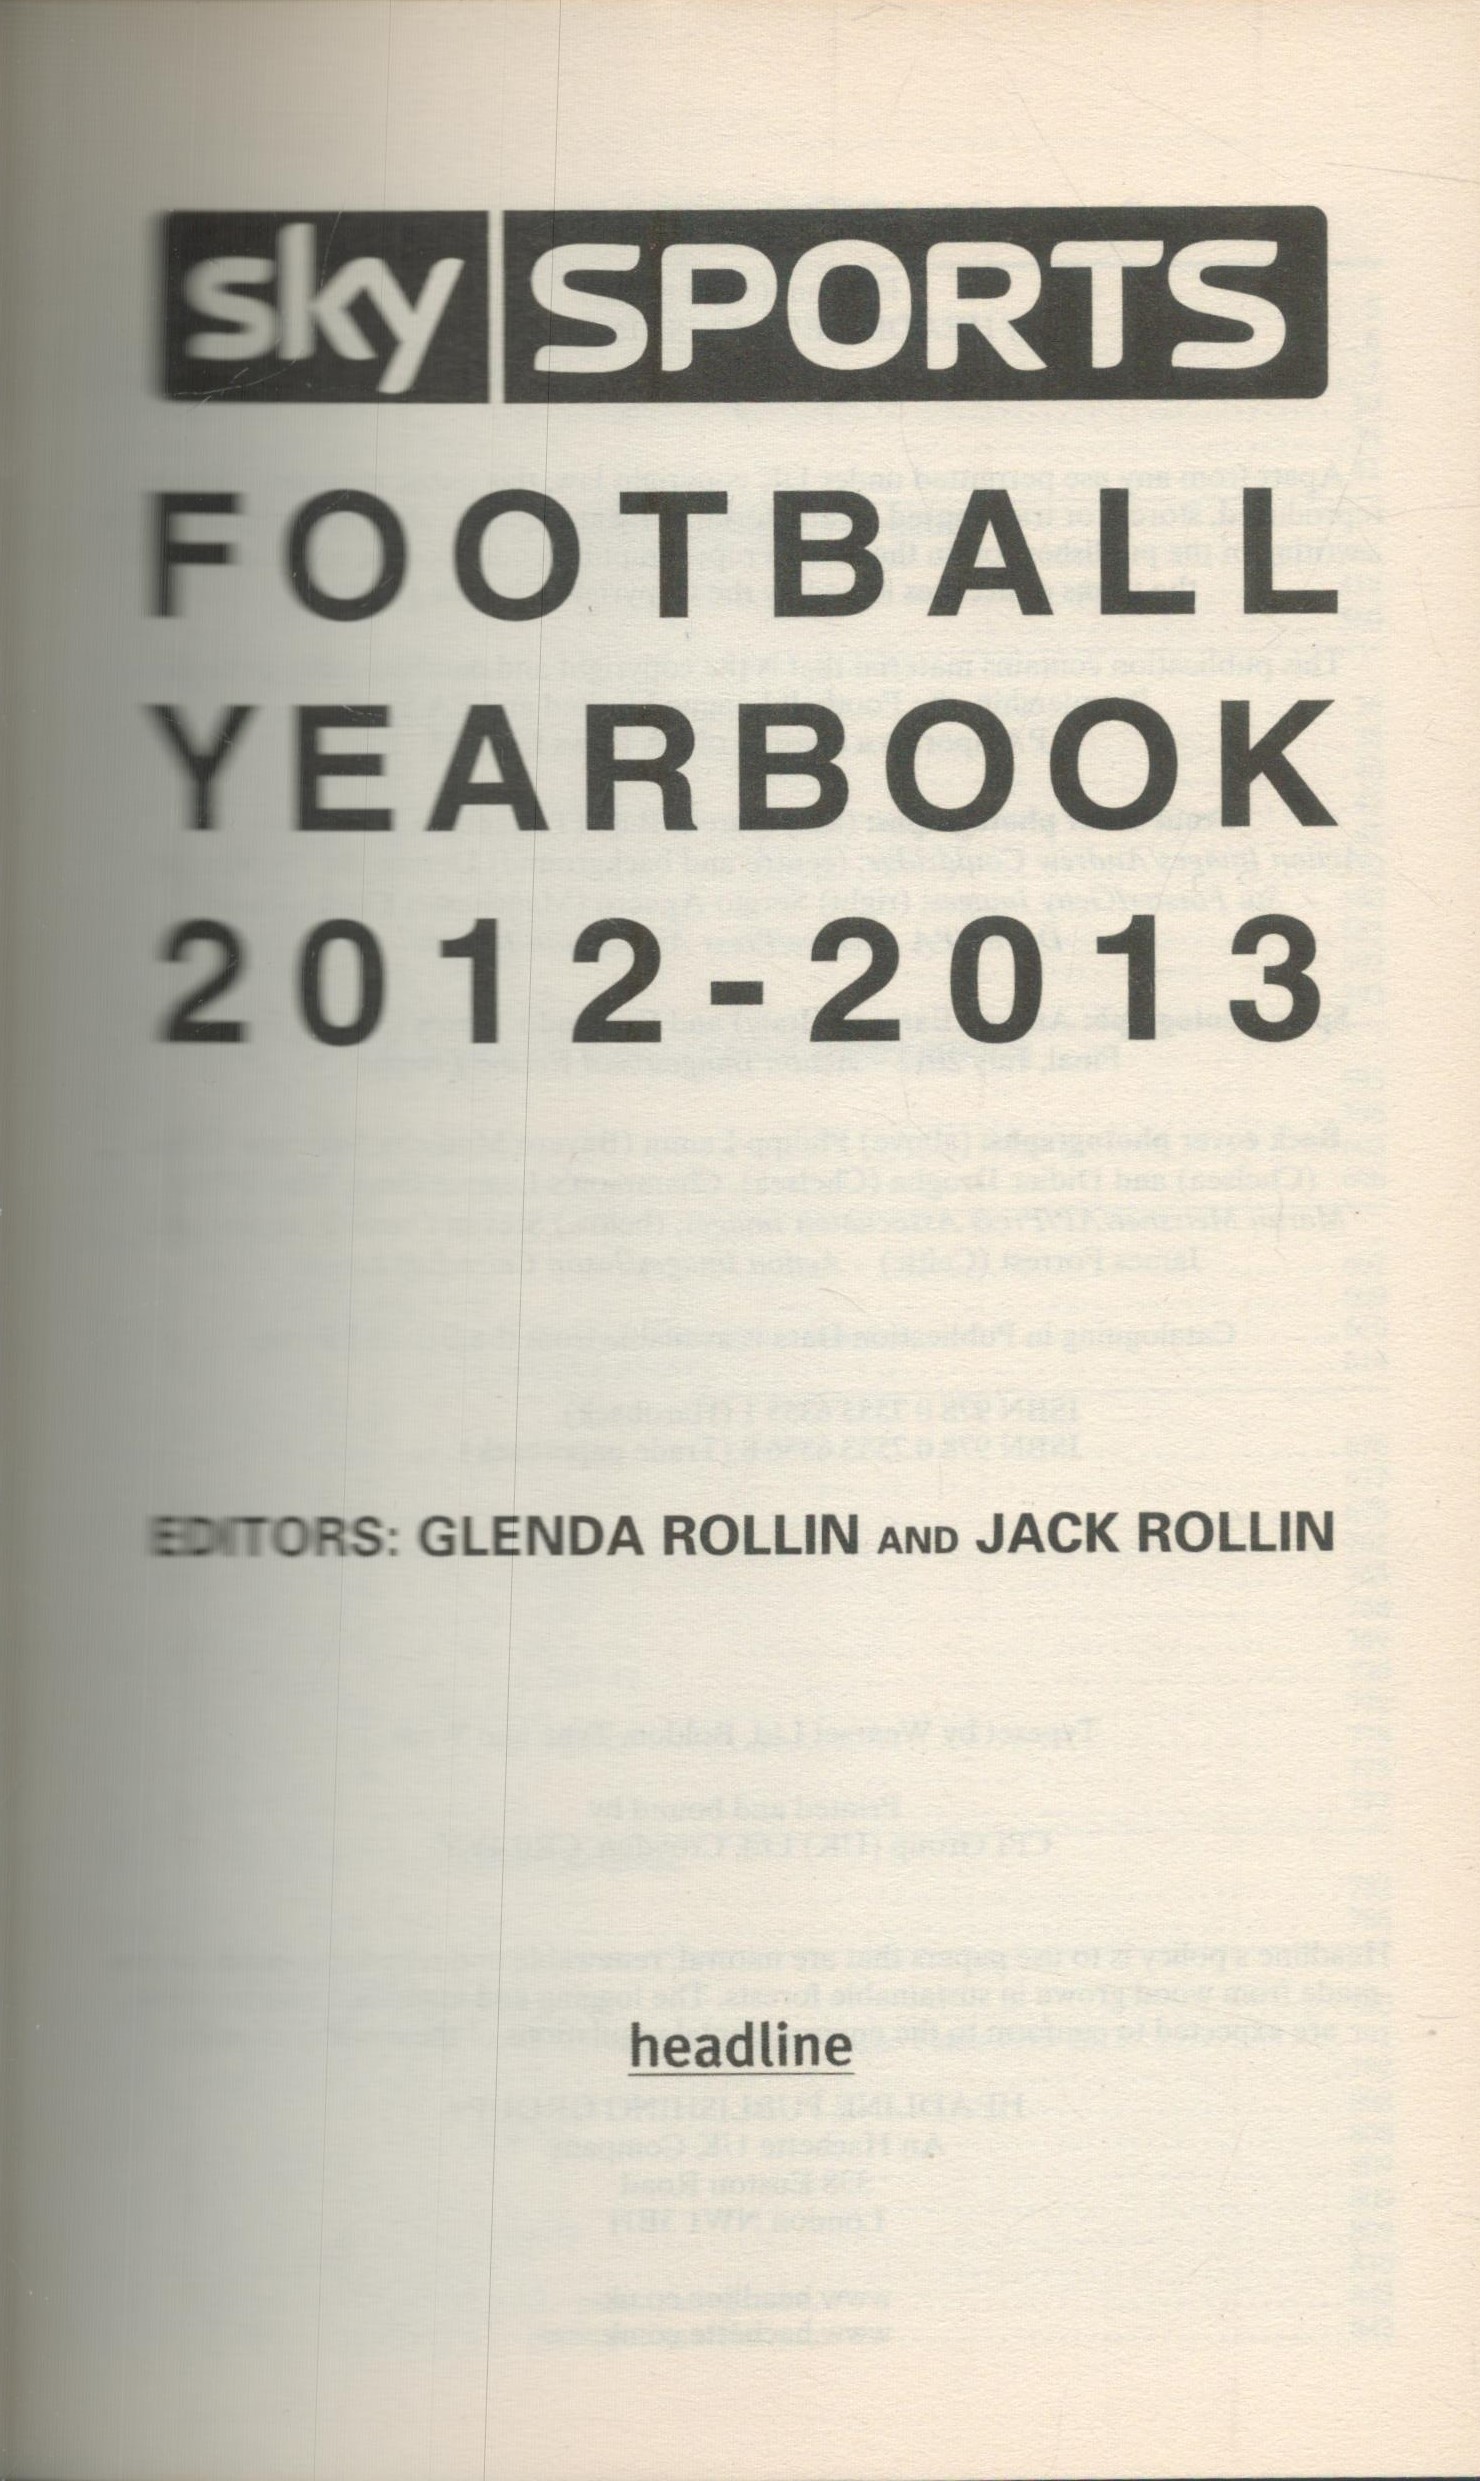 Sky Sports Football Yearbook 2012-2013 By Glenda Rollin, Jack Rollin paperback book. 1056 pages. - Bild 2 aus 3